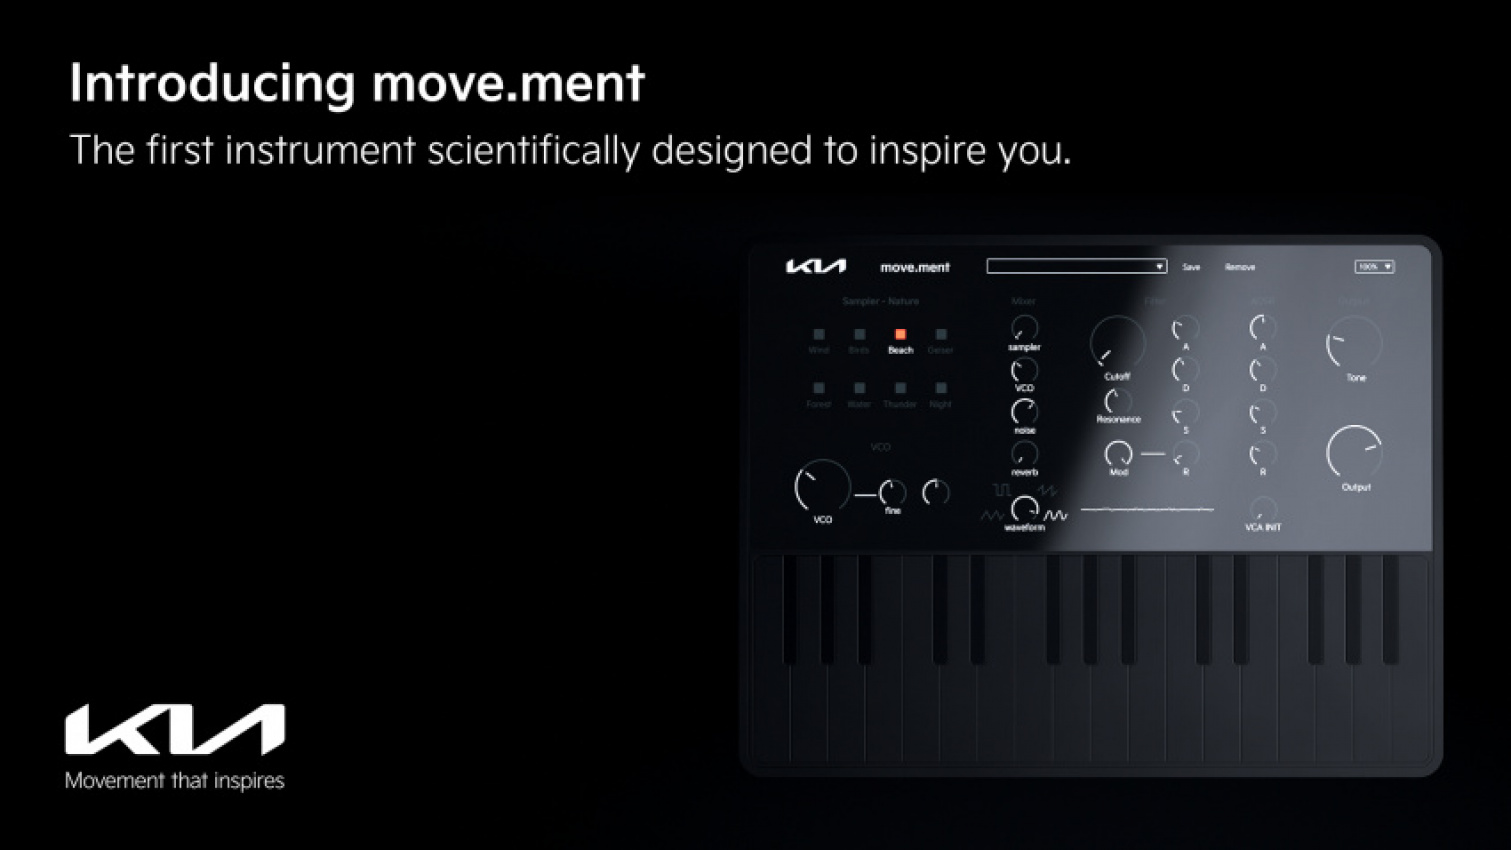 autos, brand content, cars, kia, technology, amazon, autonomous, future mobility, future technology, amazon, kia releases ‘move.ment’, the first instrument designed to inspire you